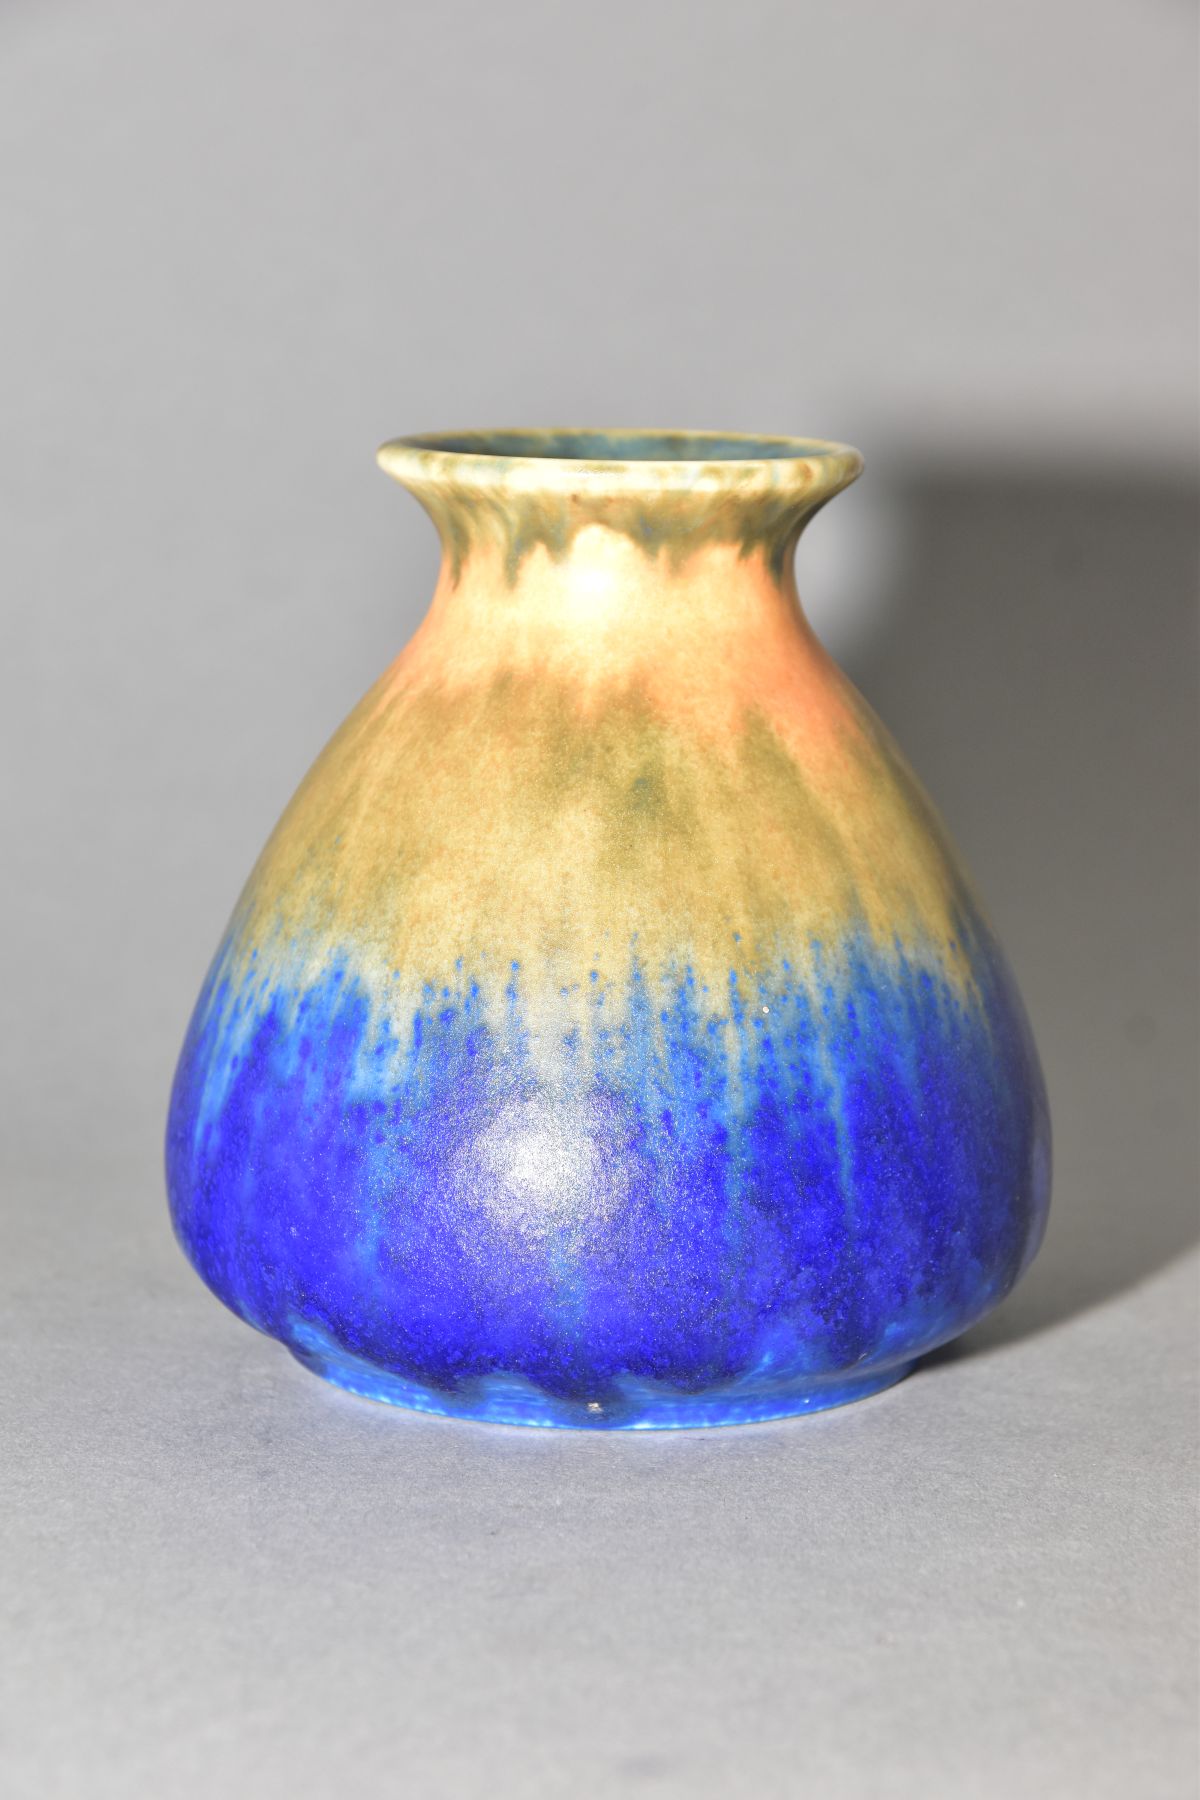 RUSKIN POTTERY, a conical vase with flared rim, bands of orange, green and blue glaze, approximate